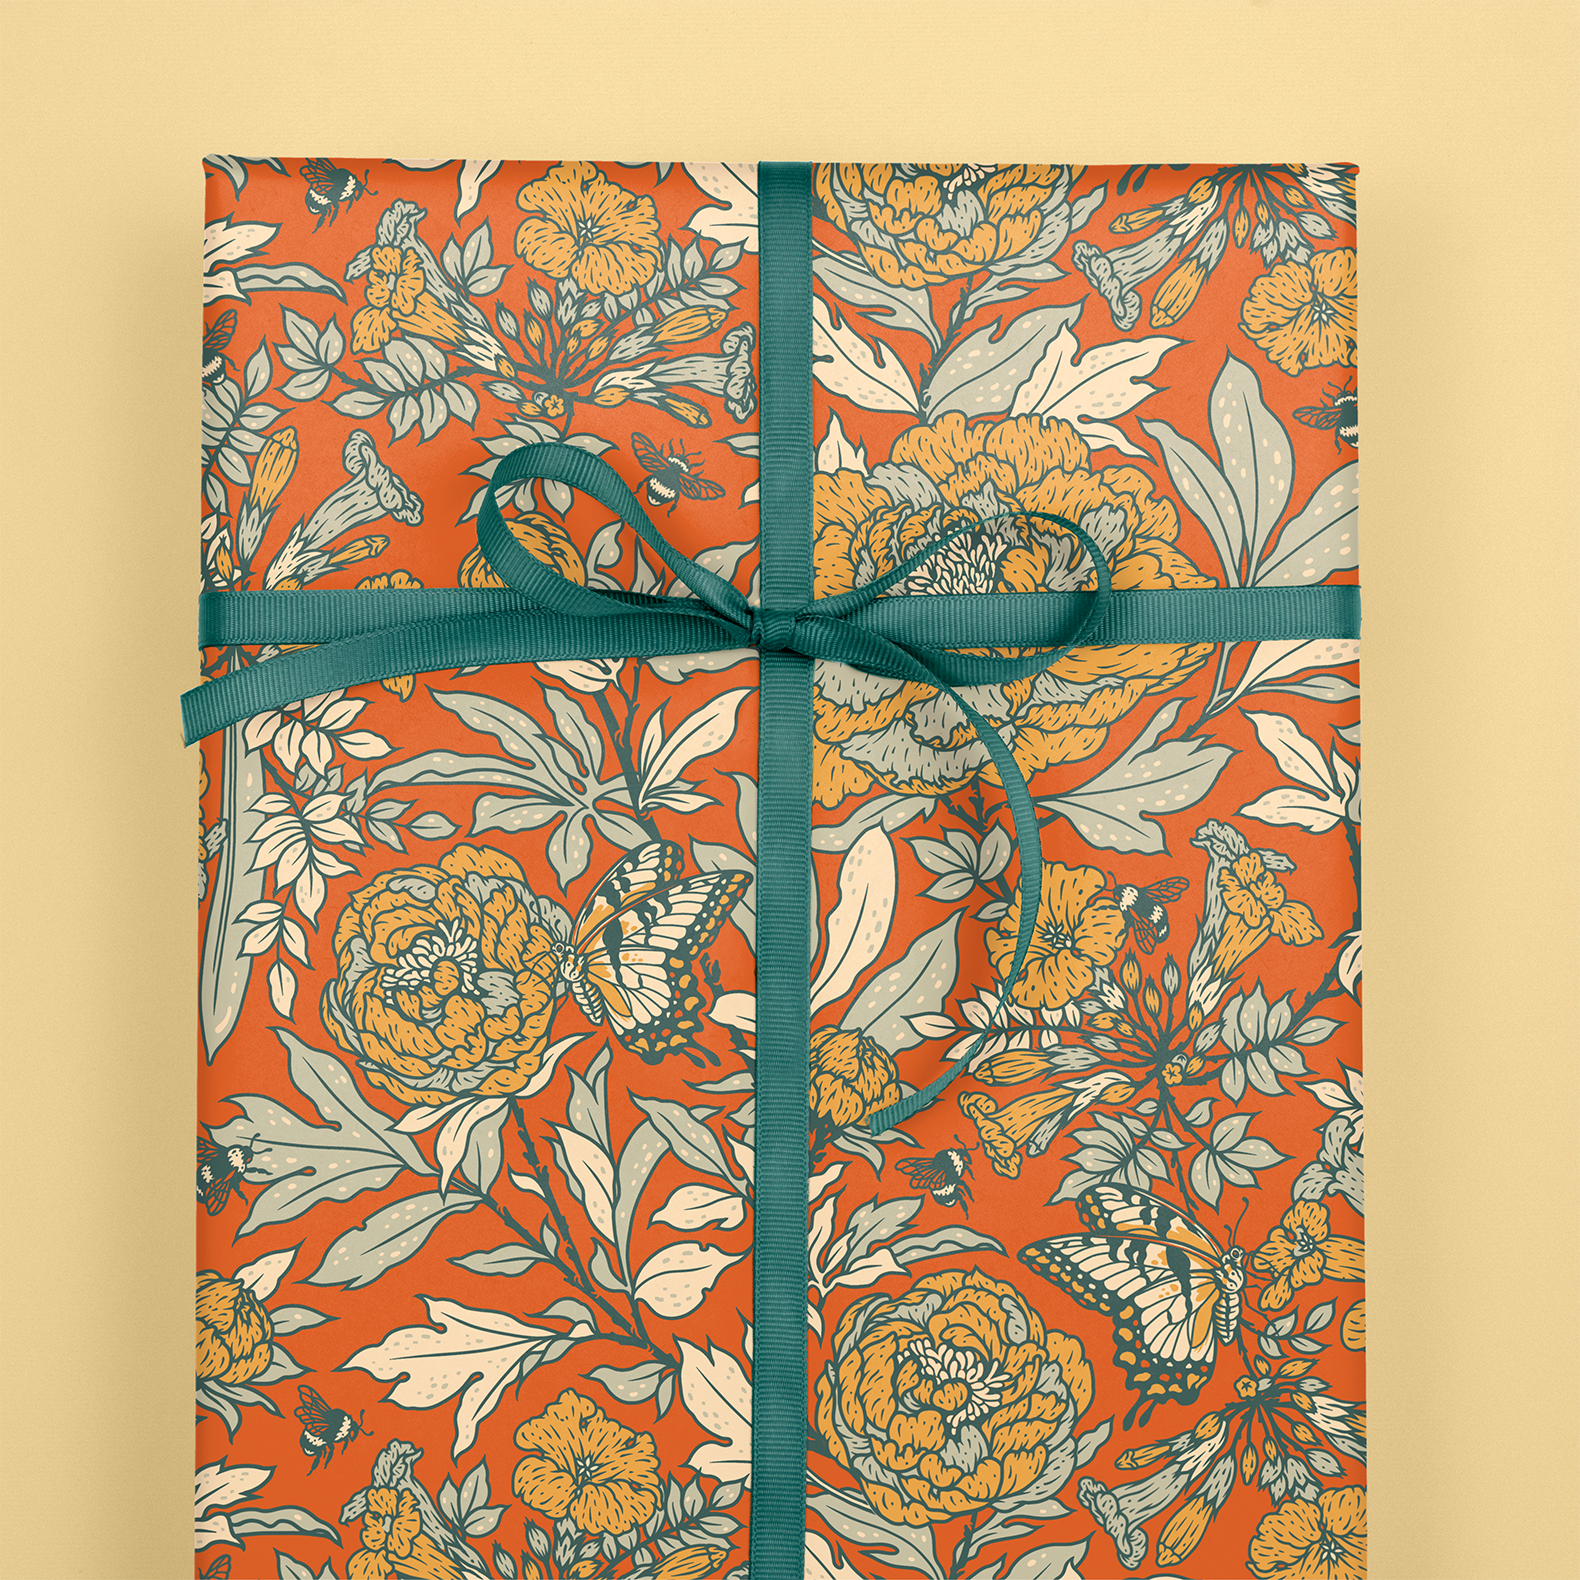 Recyclable Gift Wrap / Wrapping Paper: Peonies